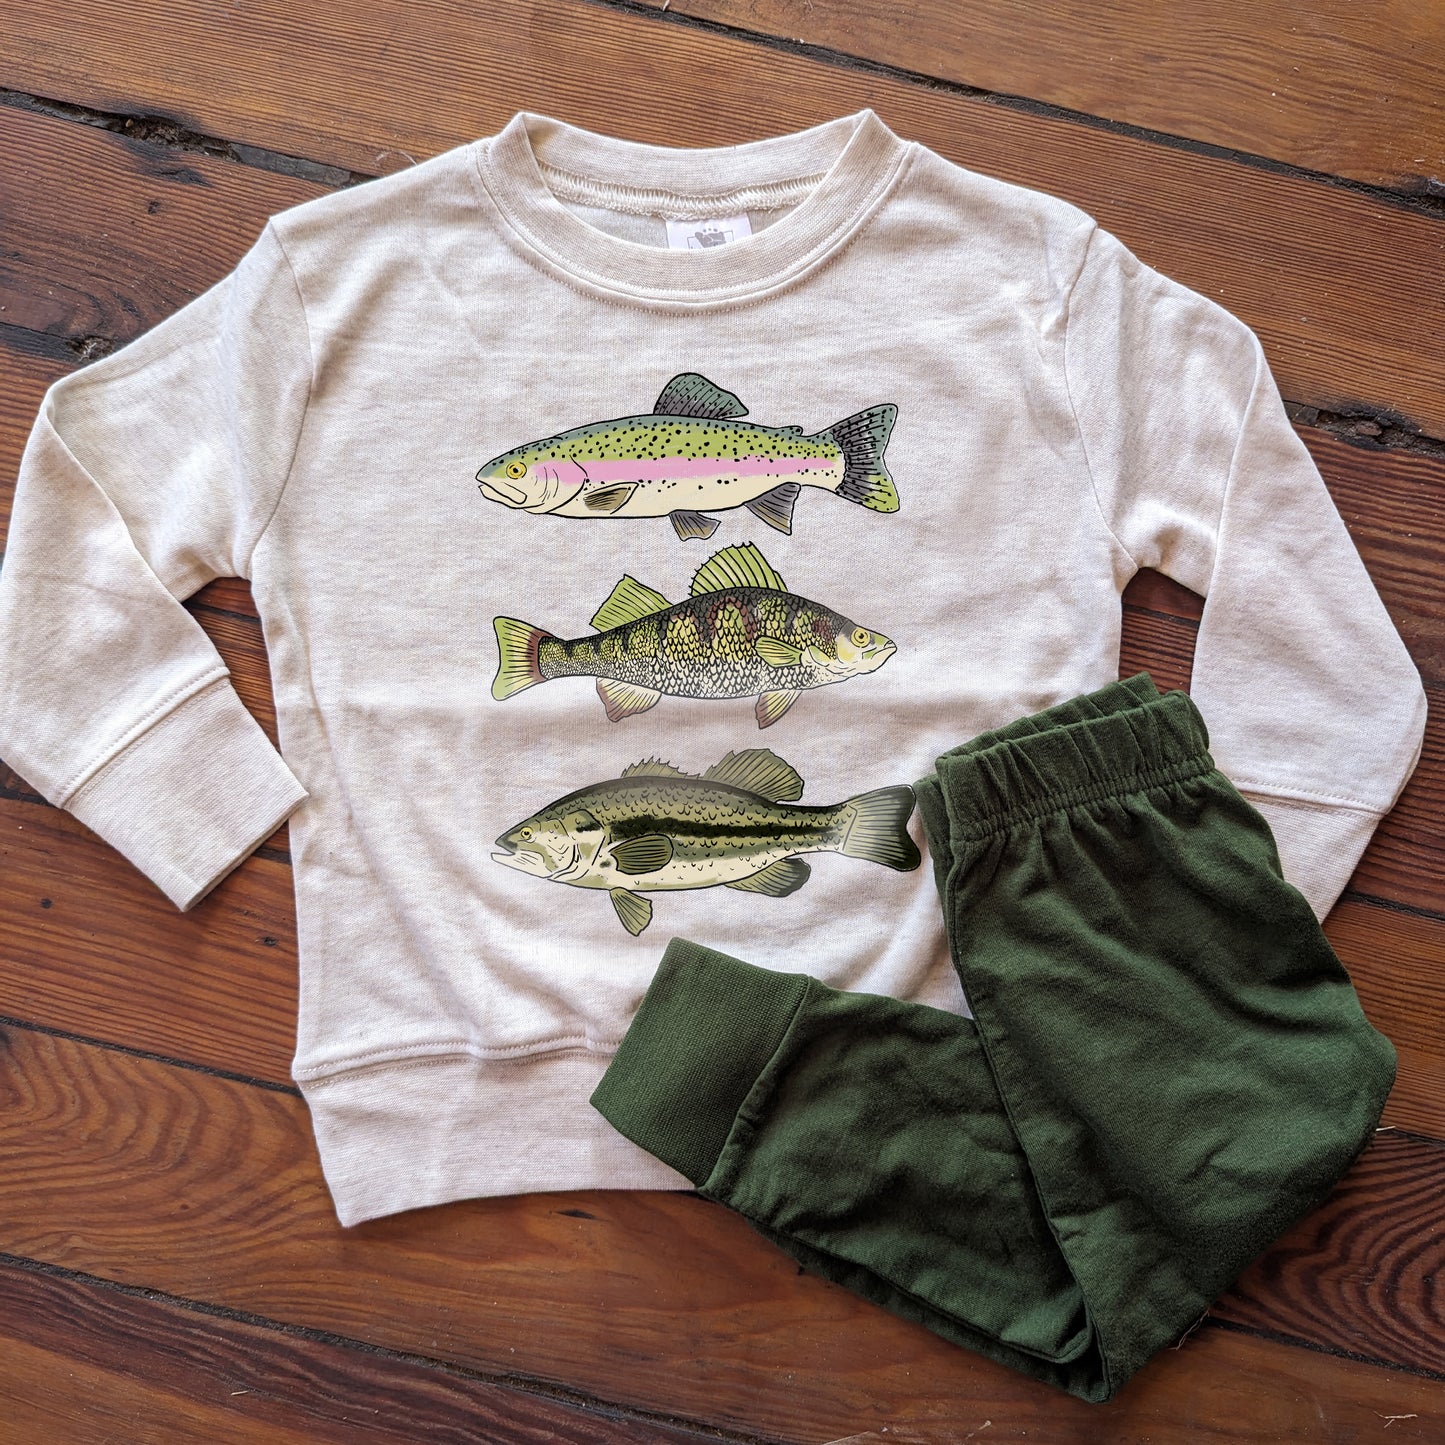 Mini Fisherman Lakeside Explorer Sleep 'n Play Set for Ages 2T-5T | Size 2T through 5T | Includes Long Sleeve Shirt & Joggers